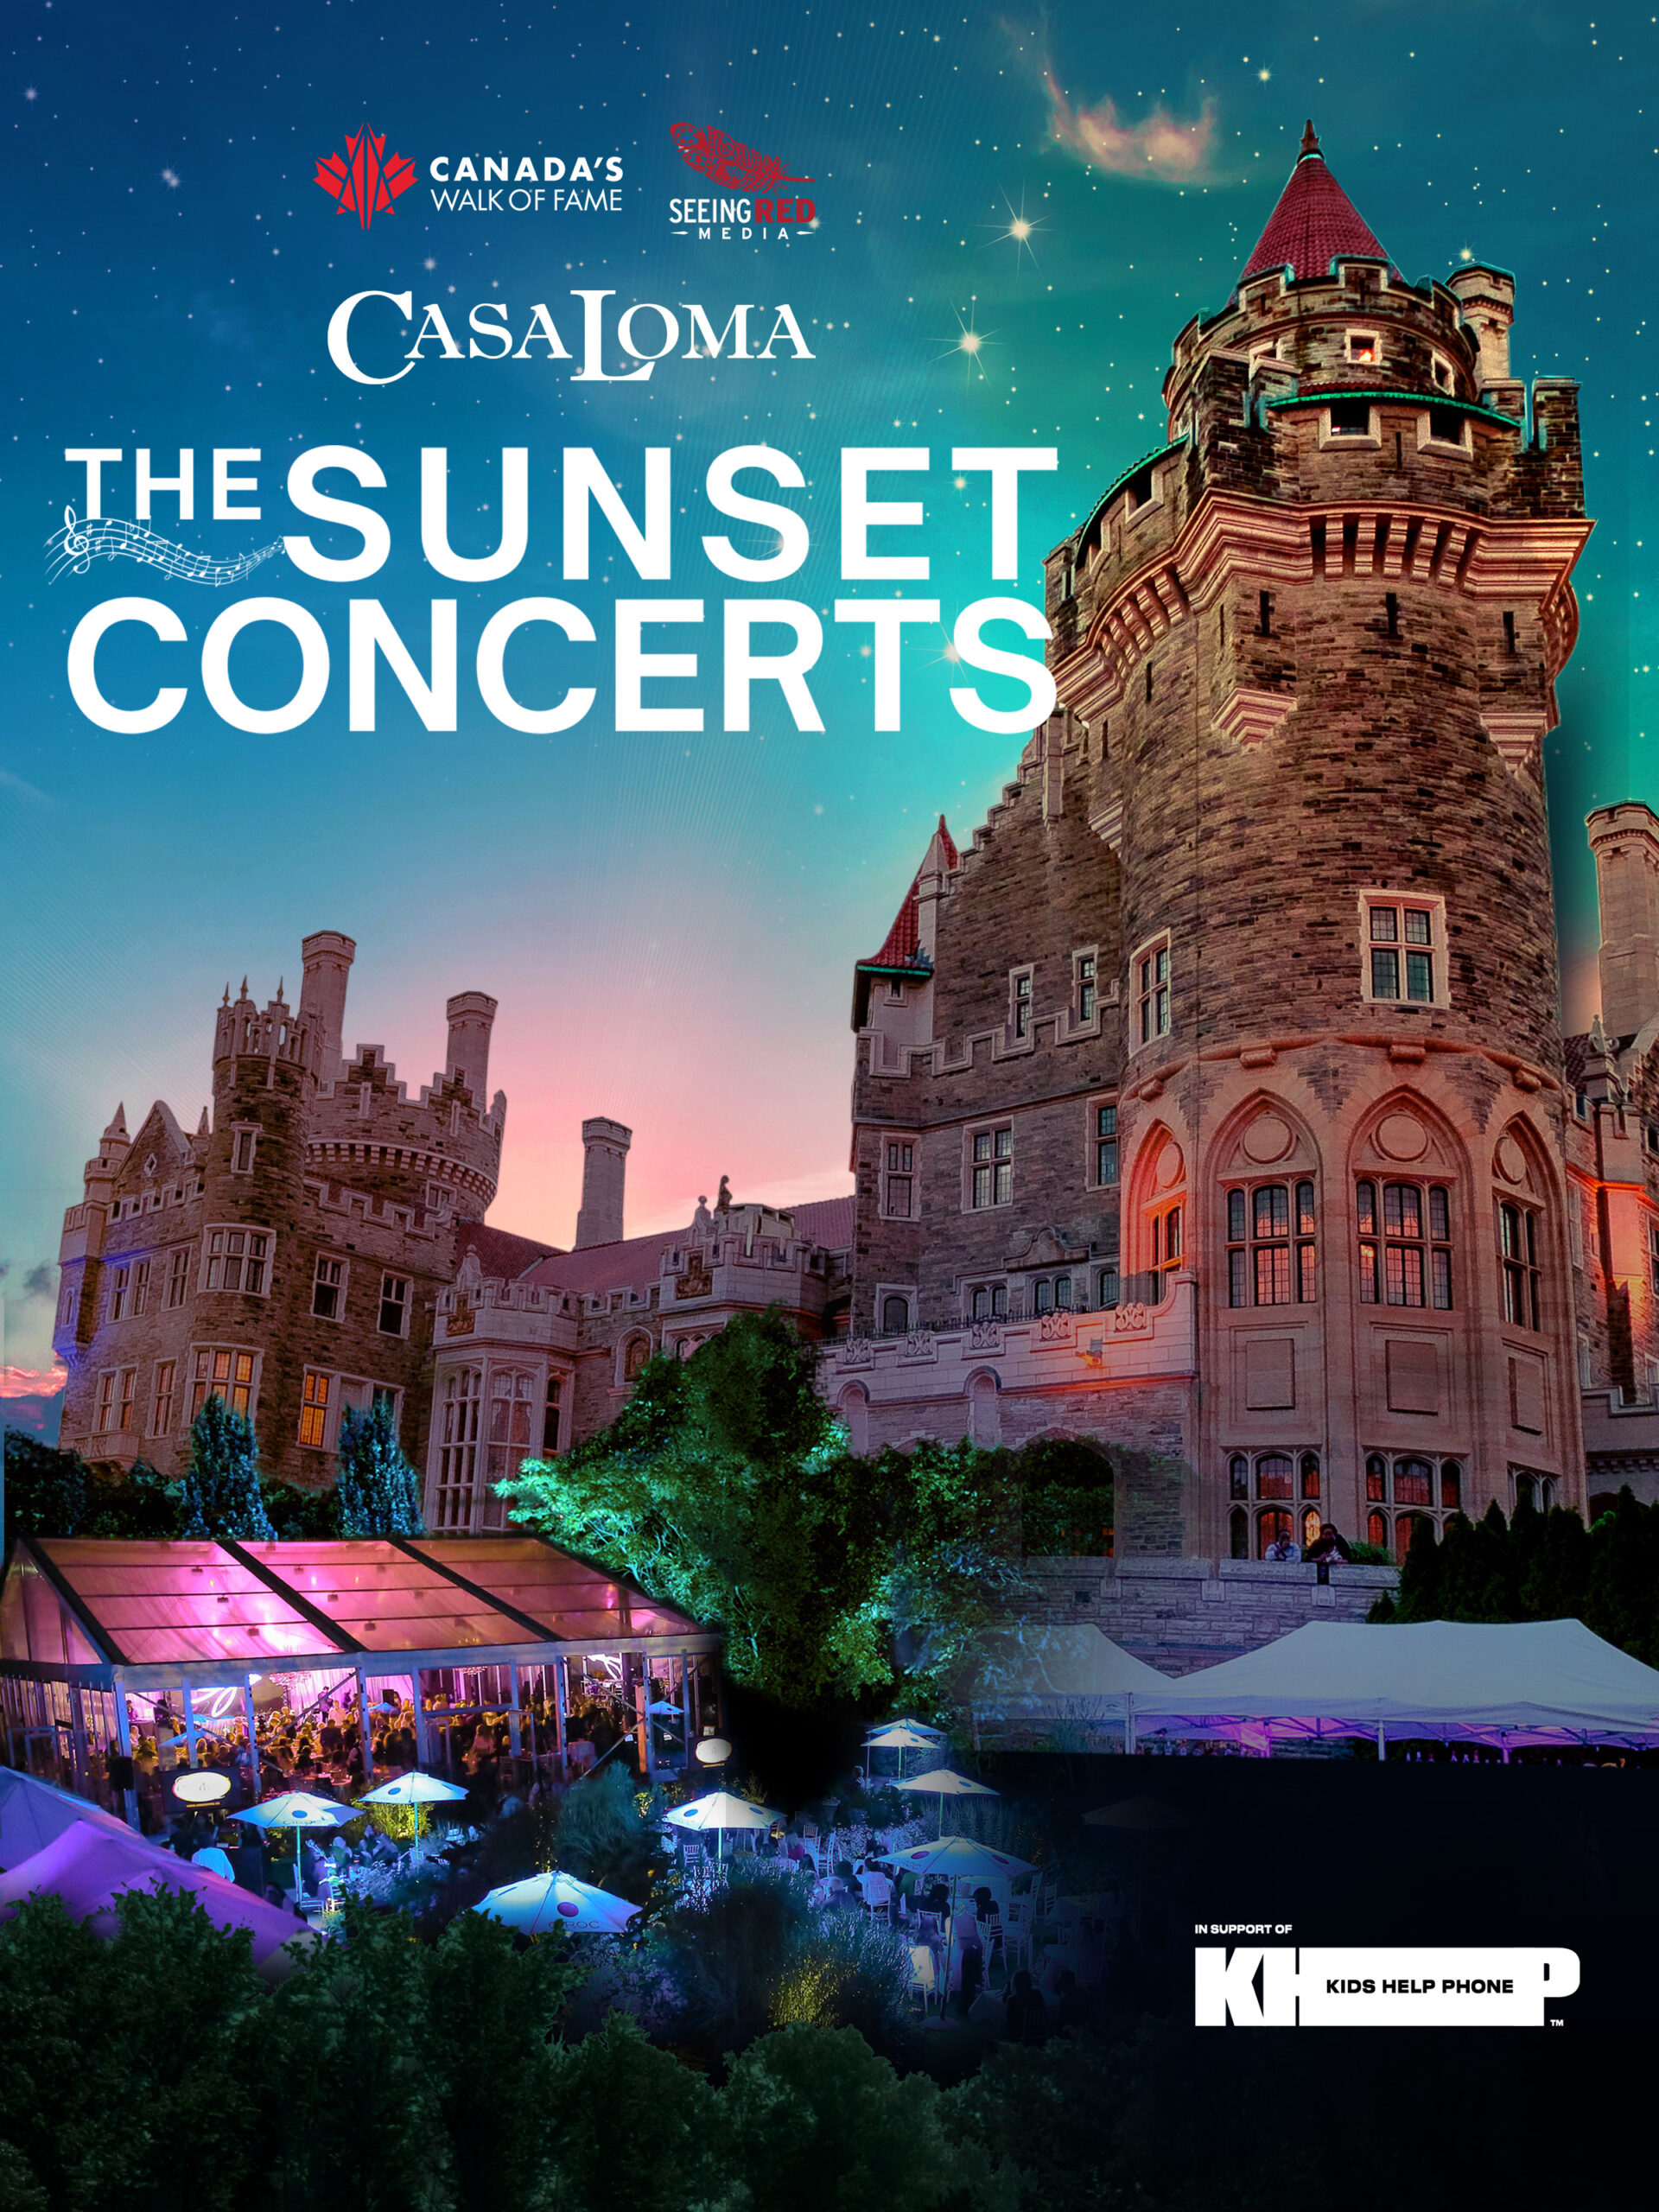 The Sunset Concerts